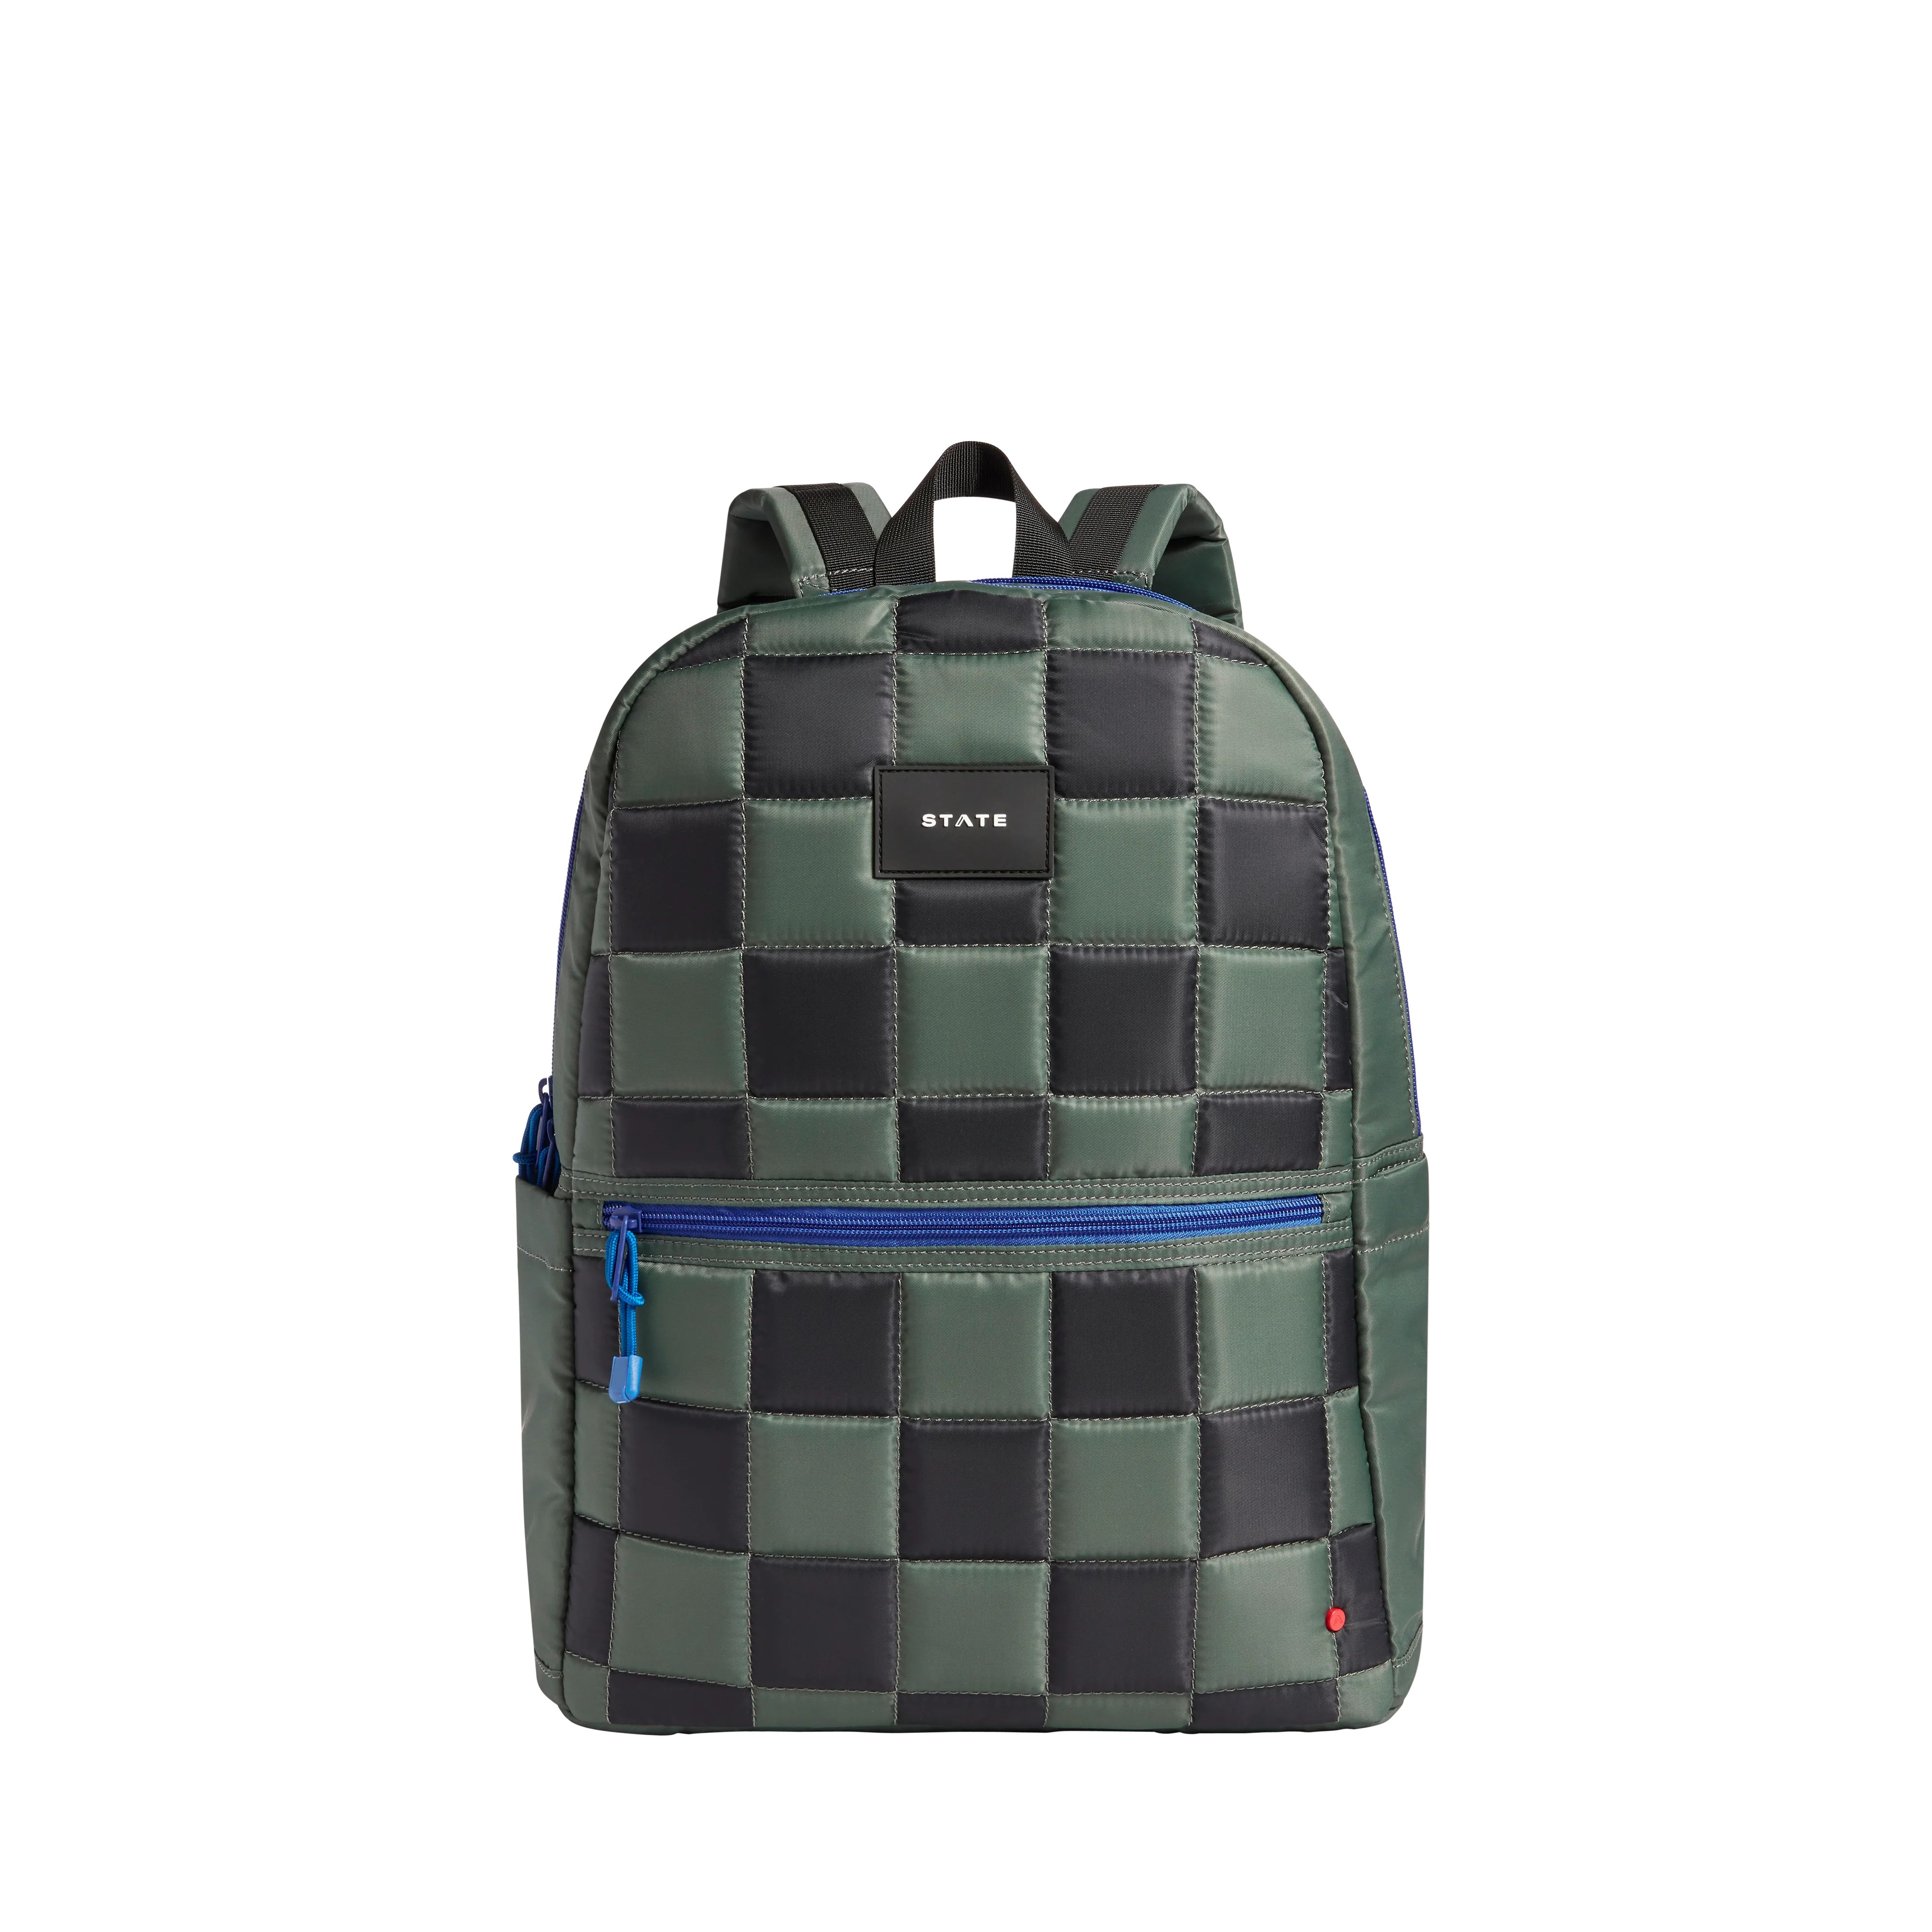 STATE Bags | Kane Kids Large Backpack Nylon Puffer Checkerboard | STATE Bags